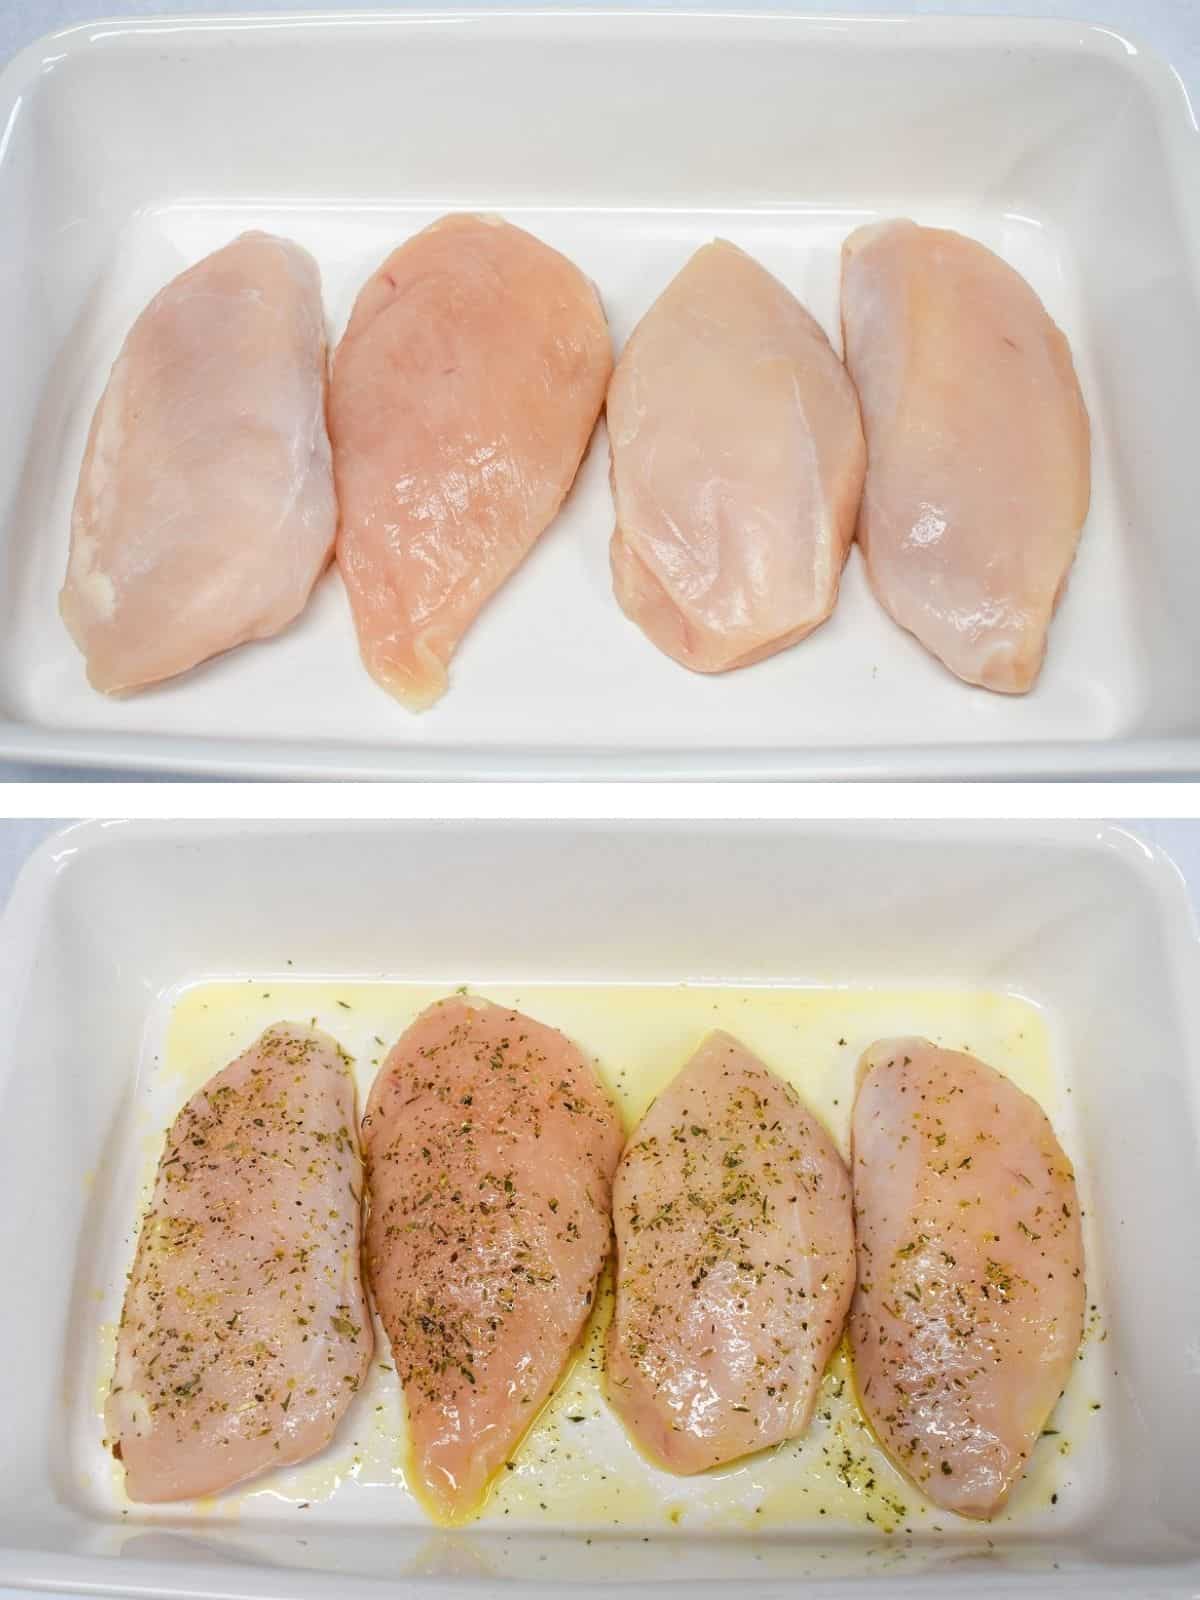 Two images of four chicken breasts arranged in a white baking dish. The top image is plain chicken, the bottom one it is seasoned.